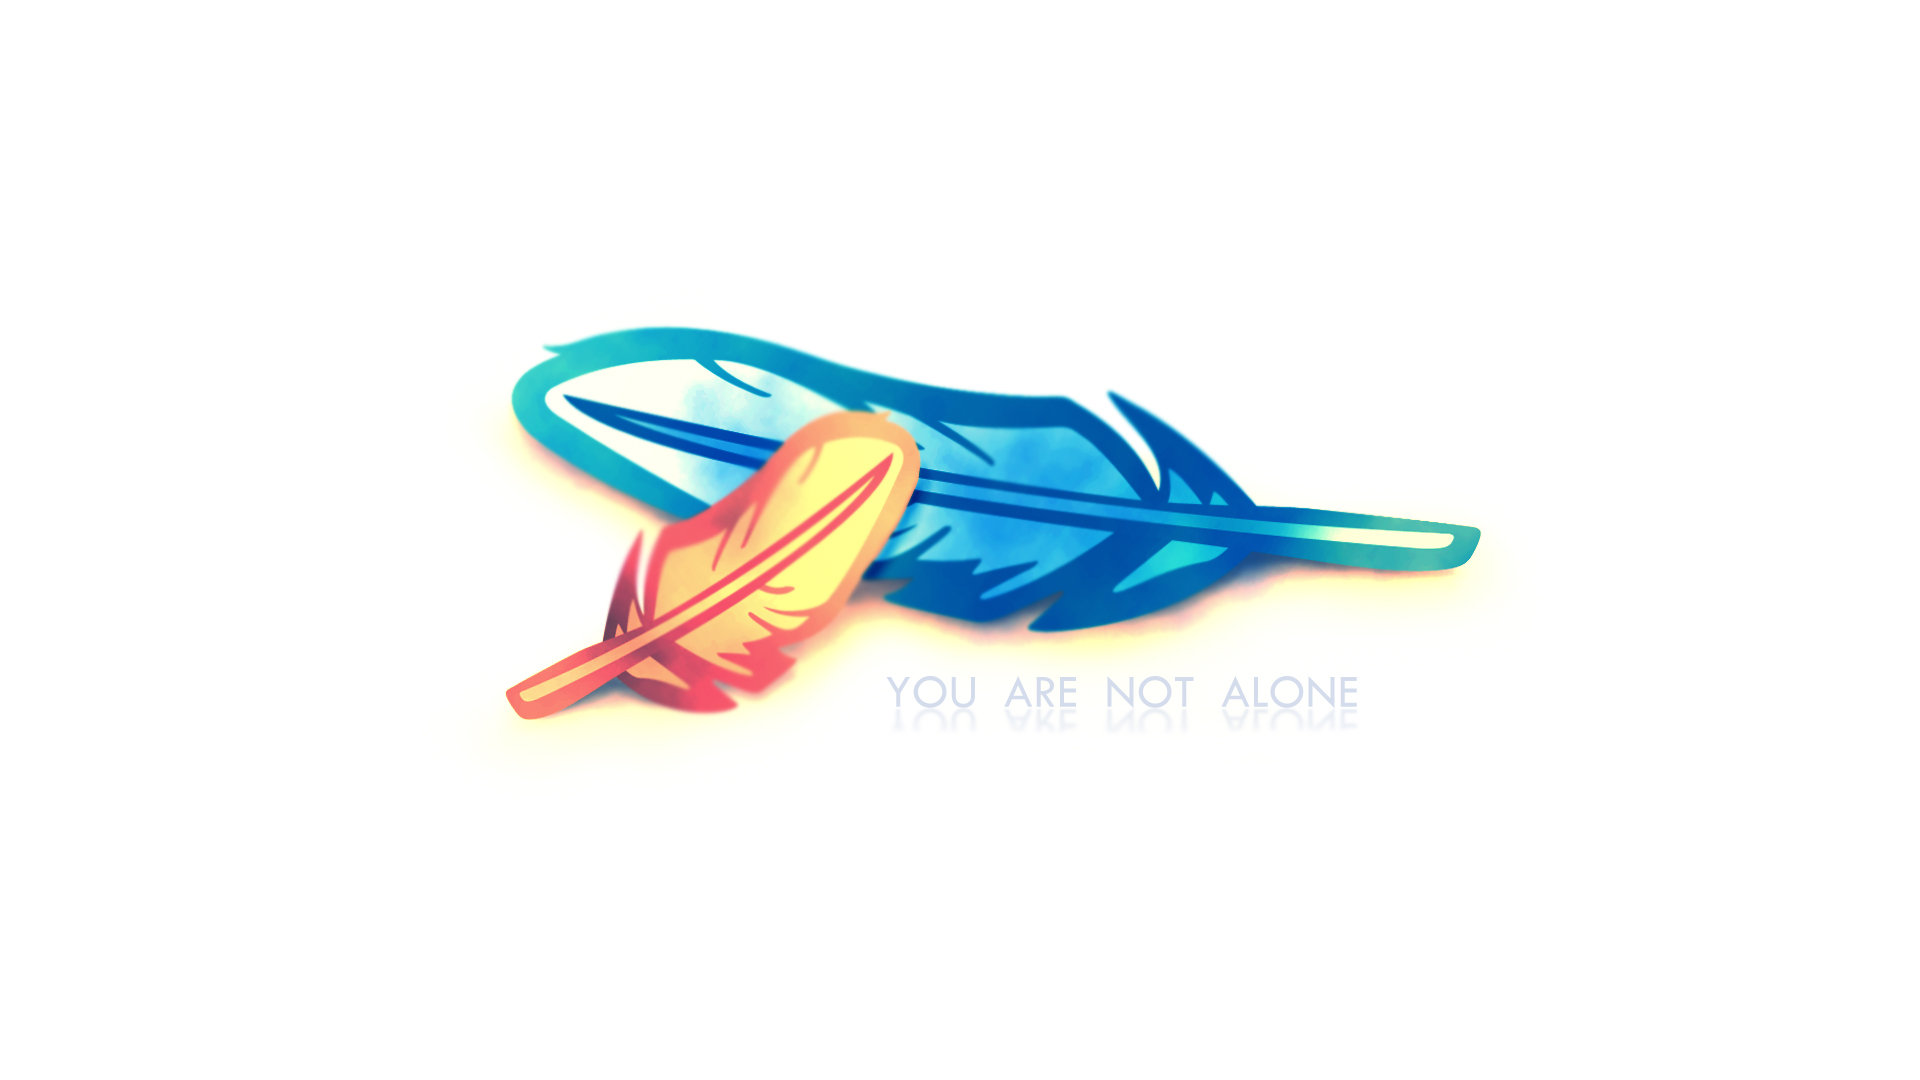 You are not alone by HairyFox